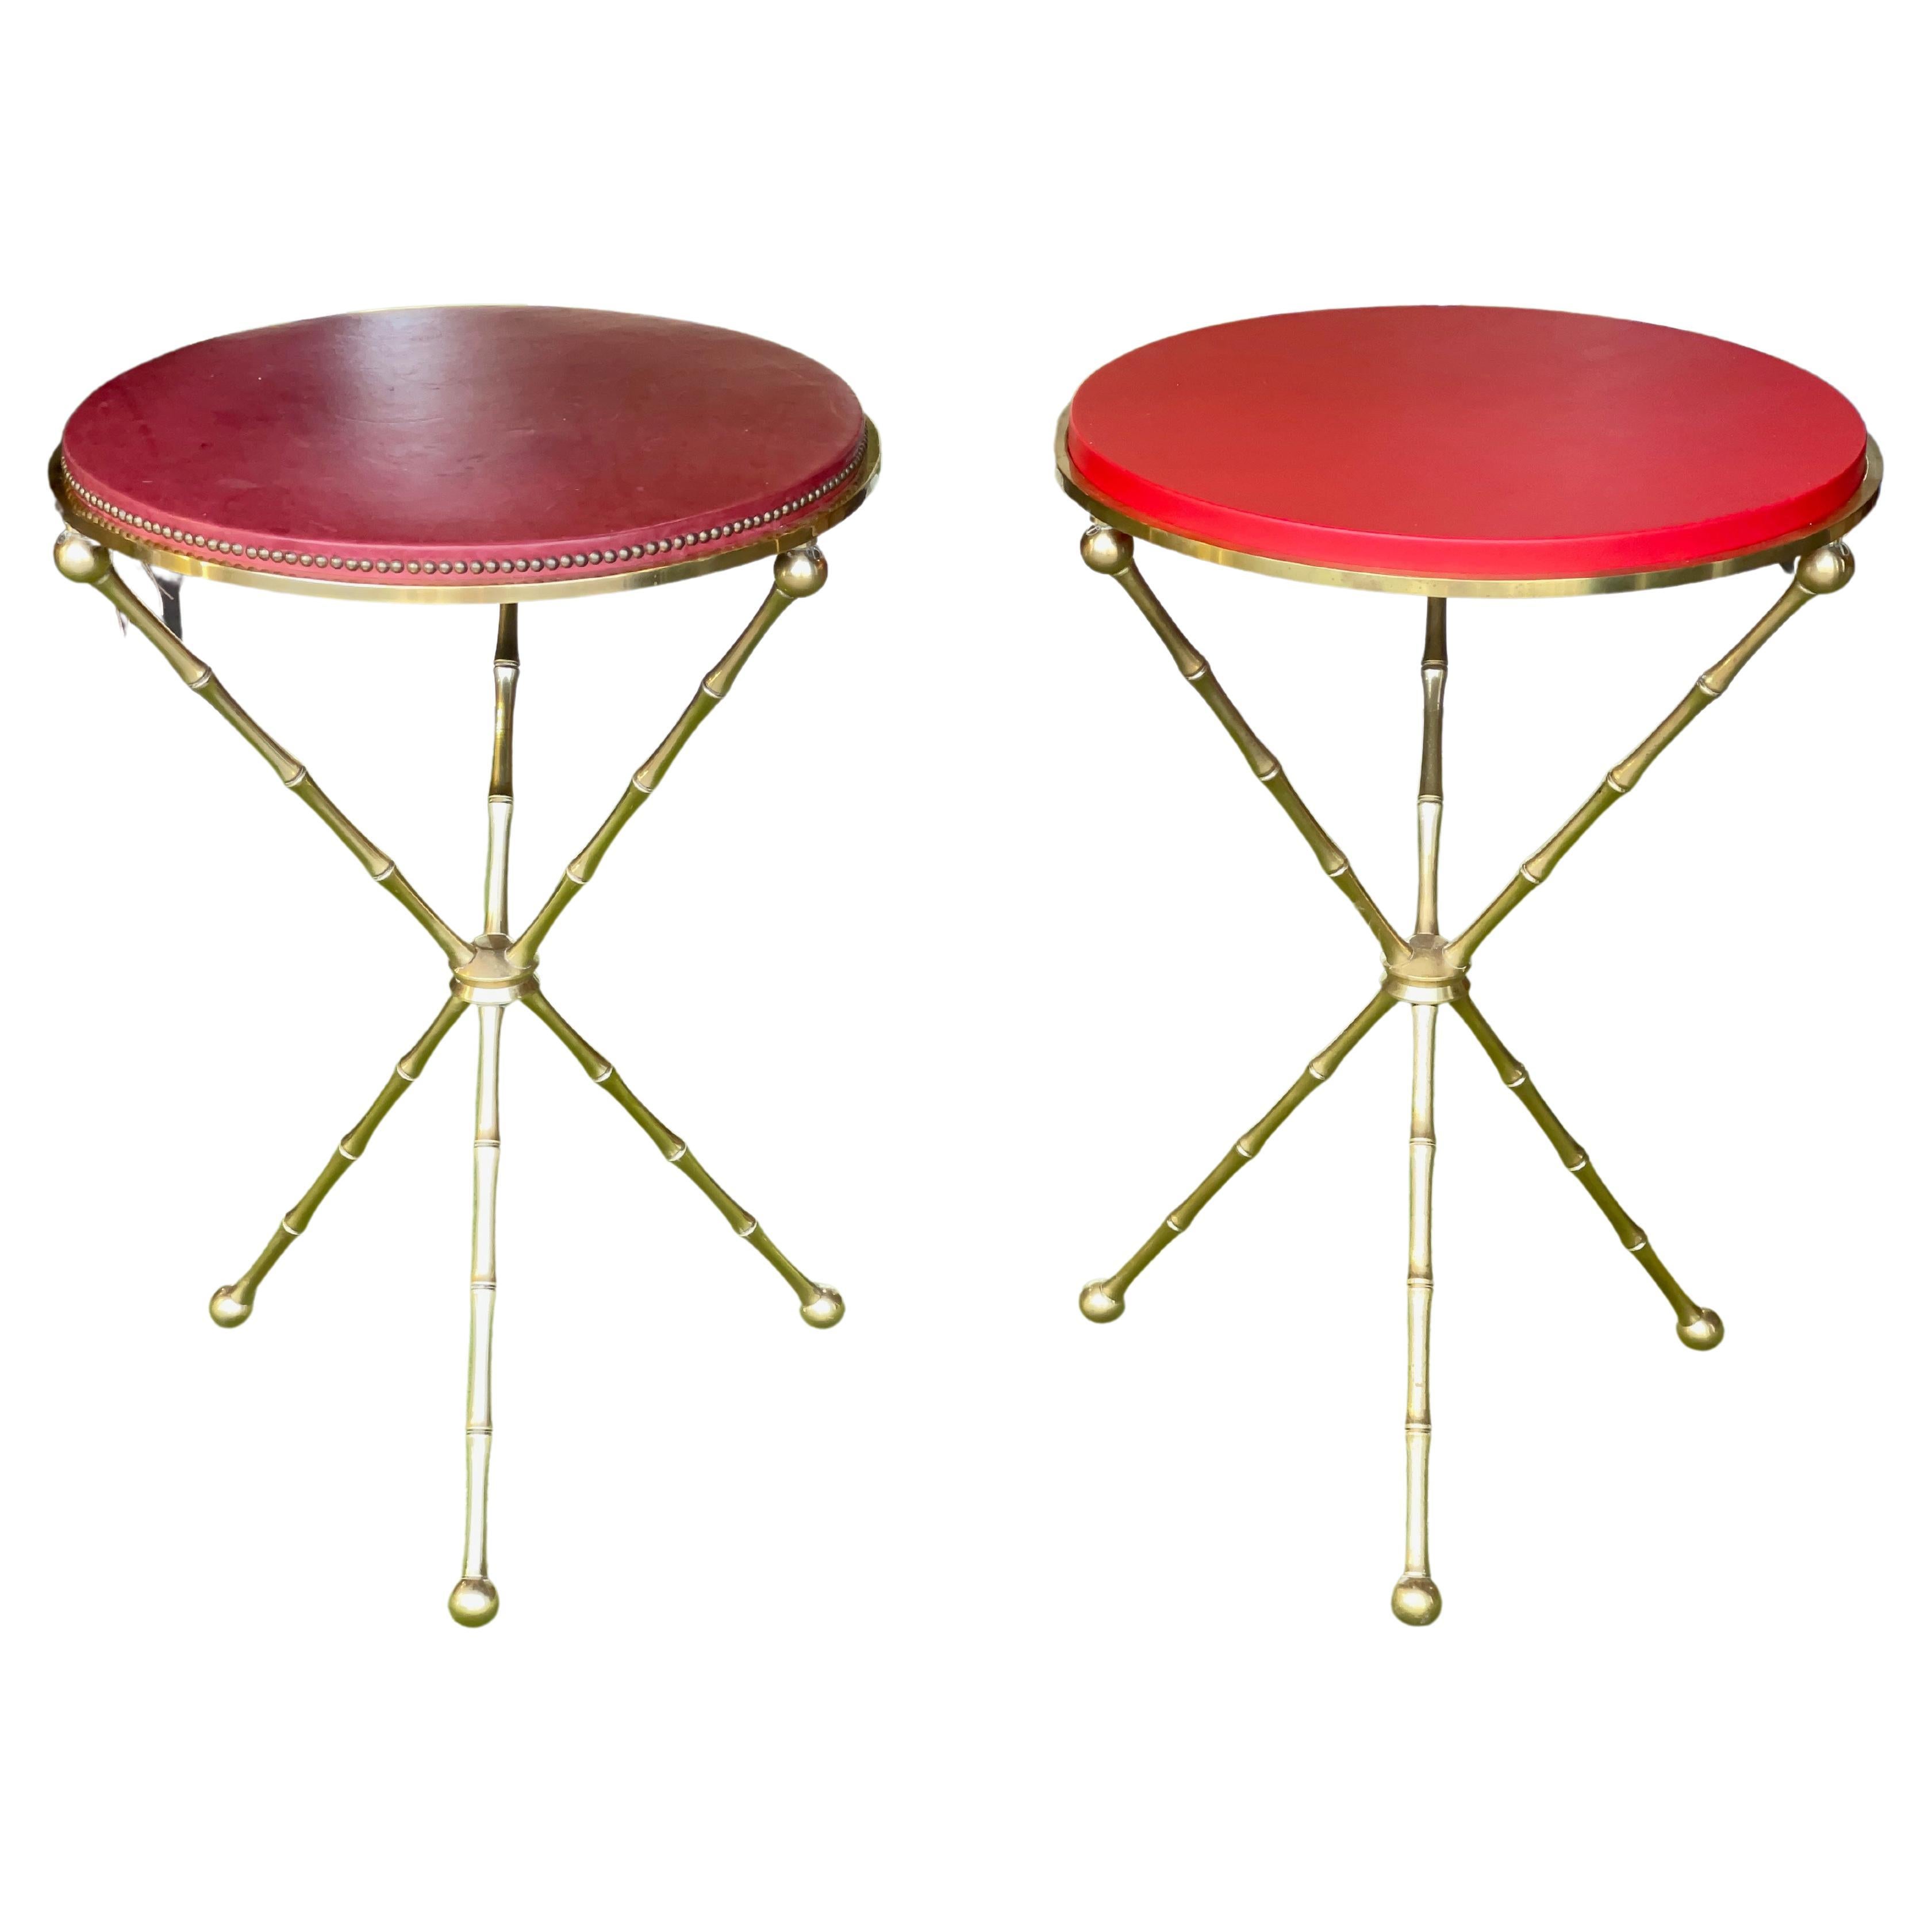 Hollywood Regency Maison Bagues style brass bamboo tripod table